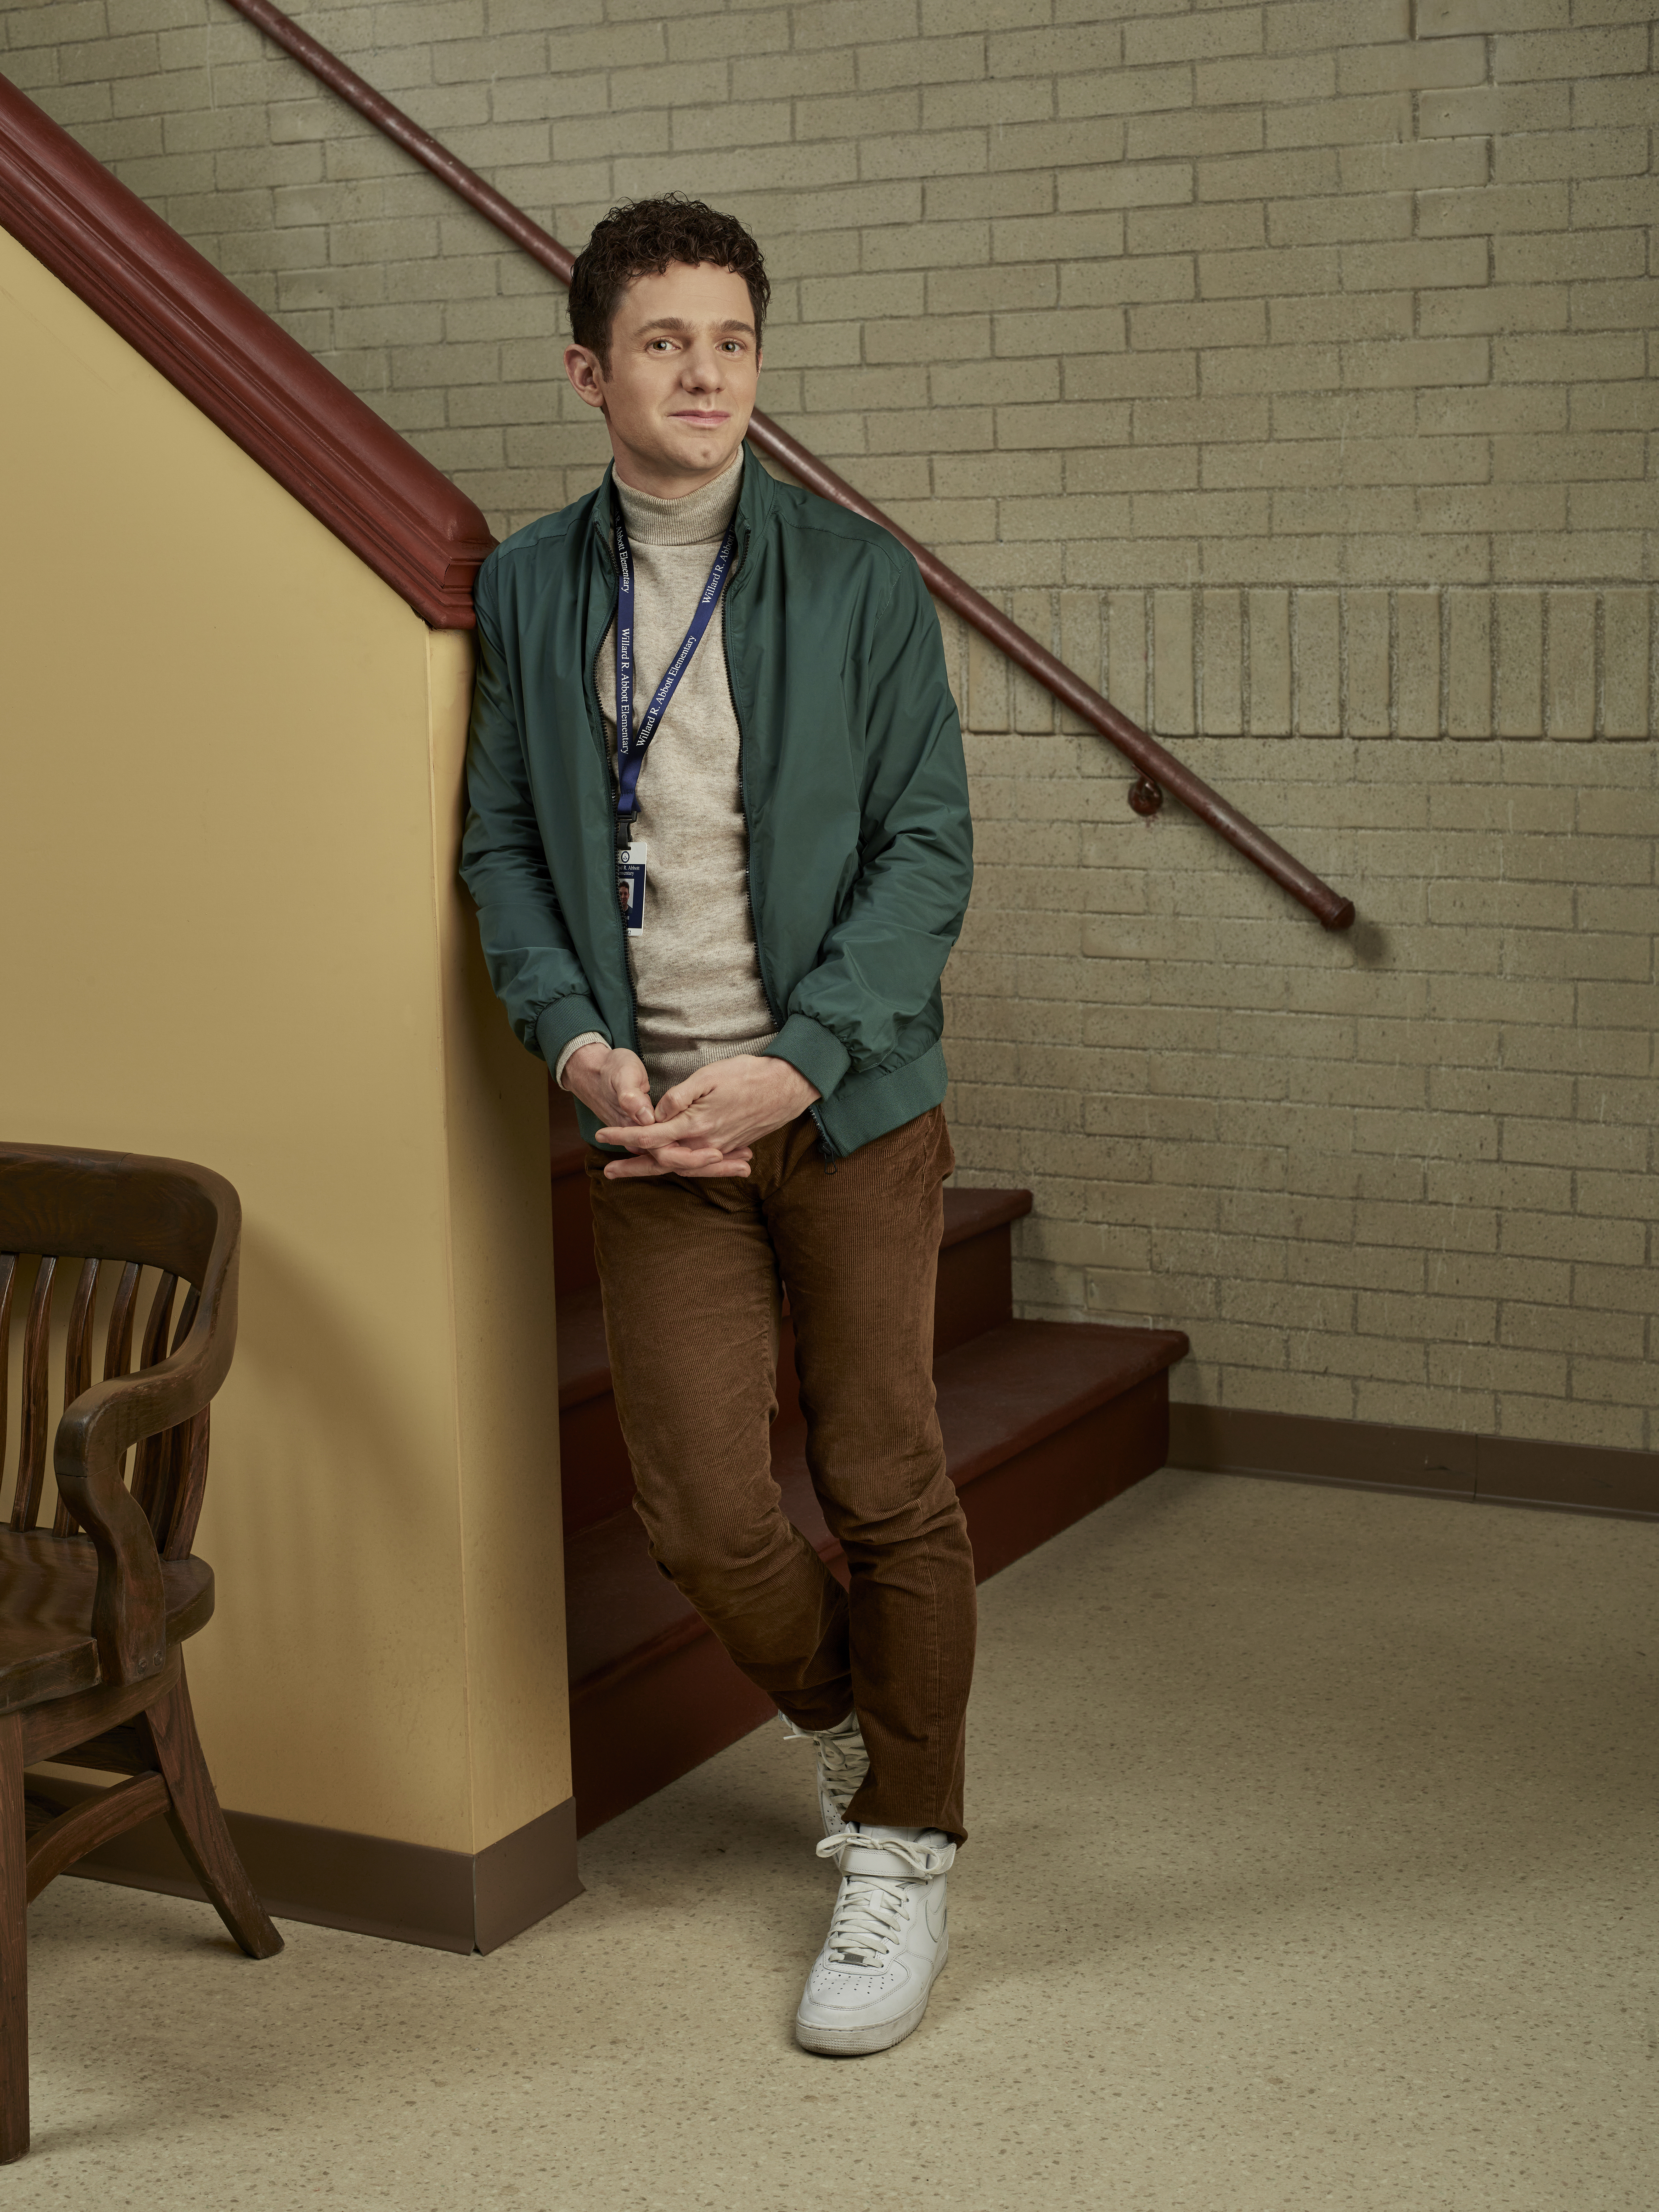 Man leaning against wall by stairs, wearing a green jacket, brown pants, and white sneakers